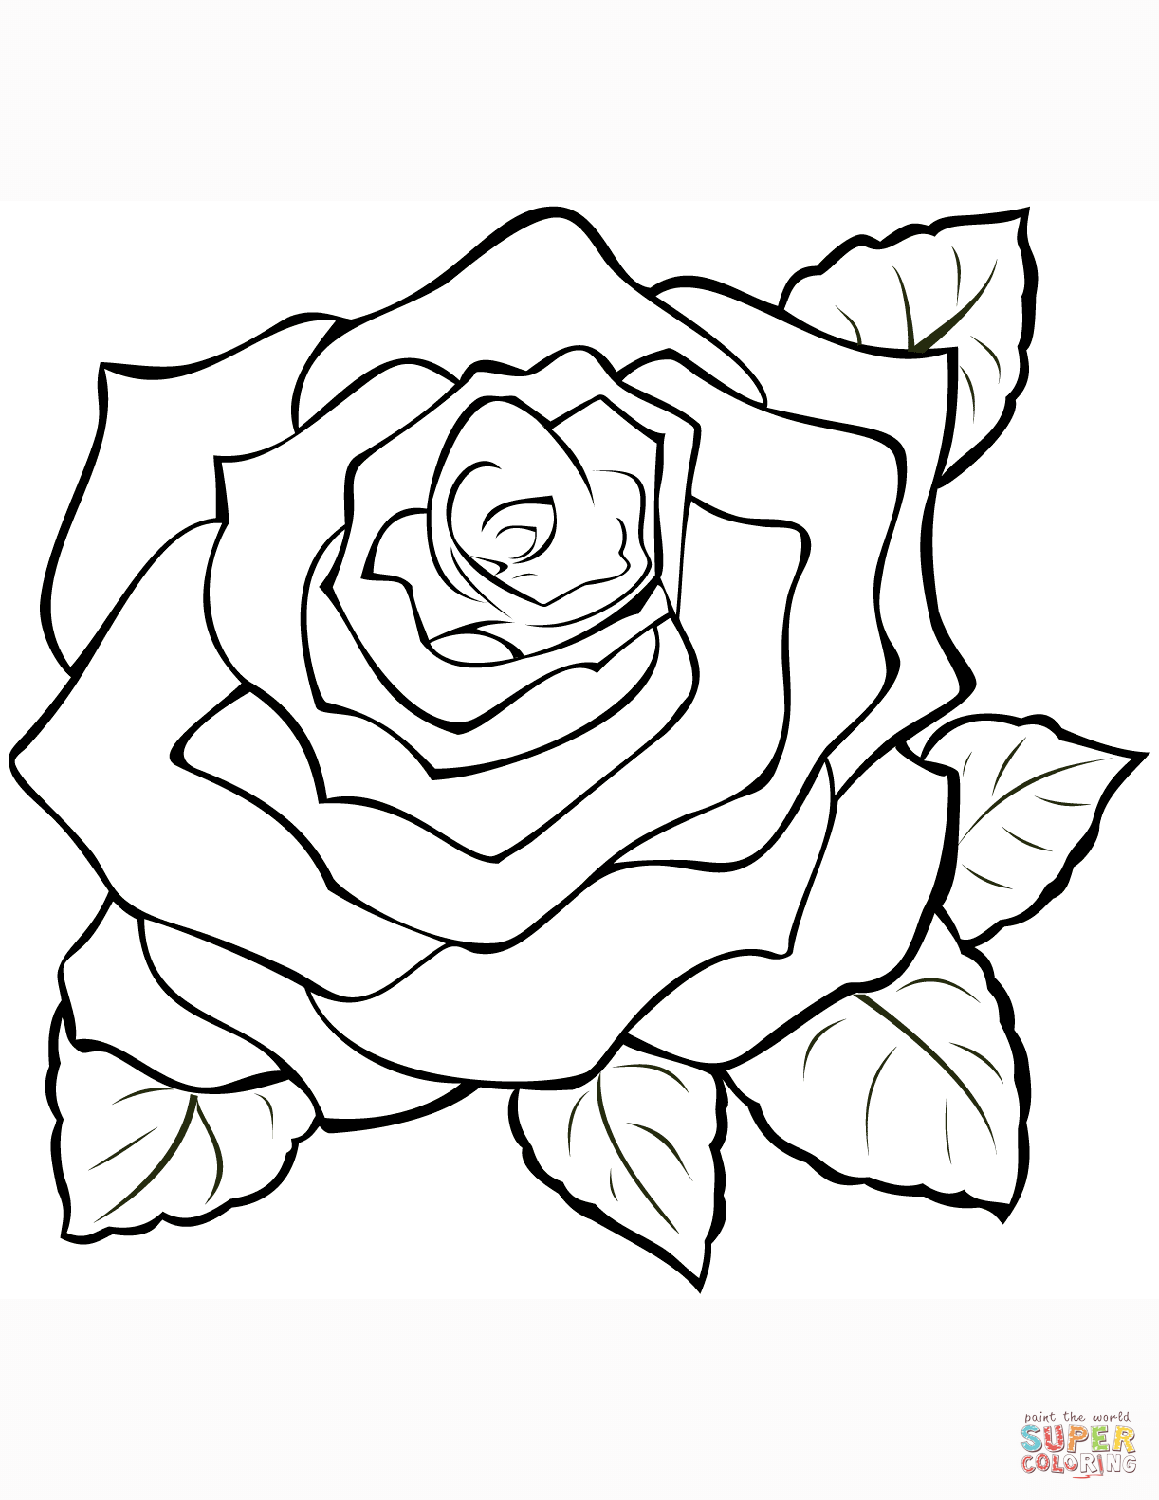 Rose coloring page | Free Printable Coloring Pages